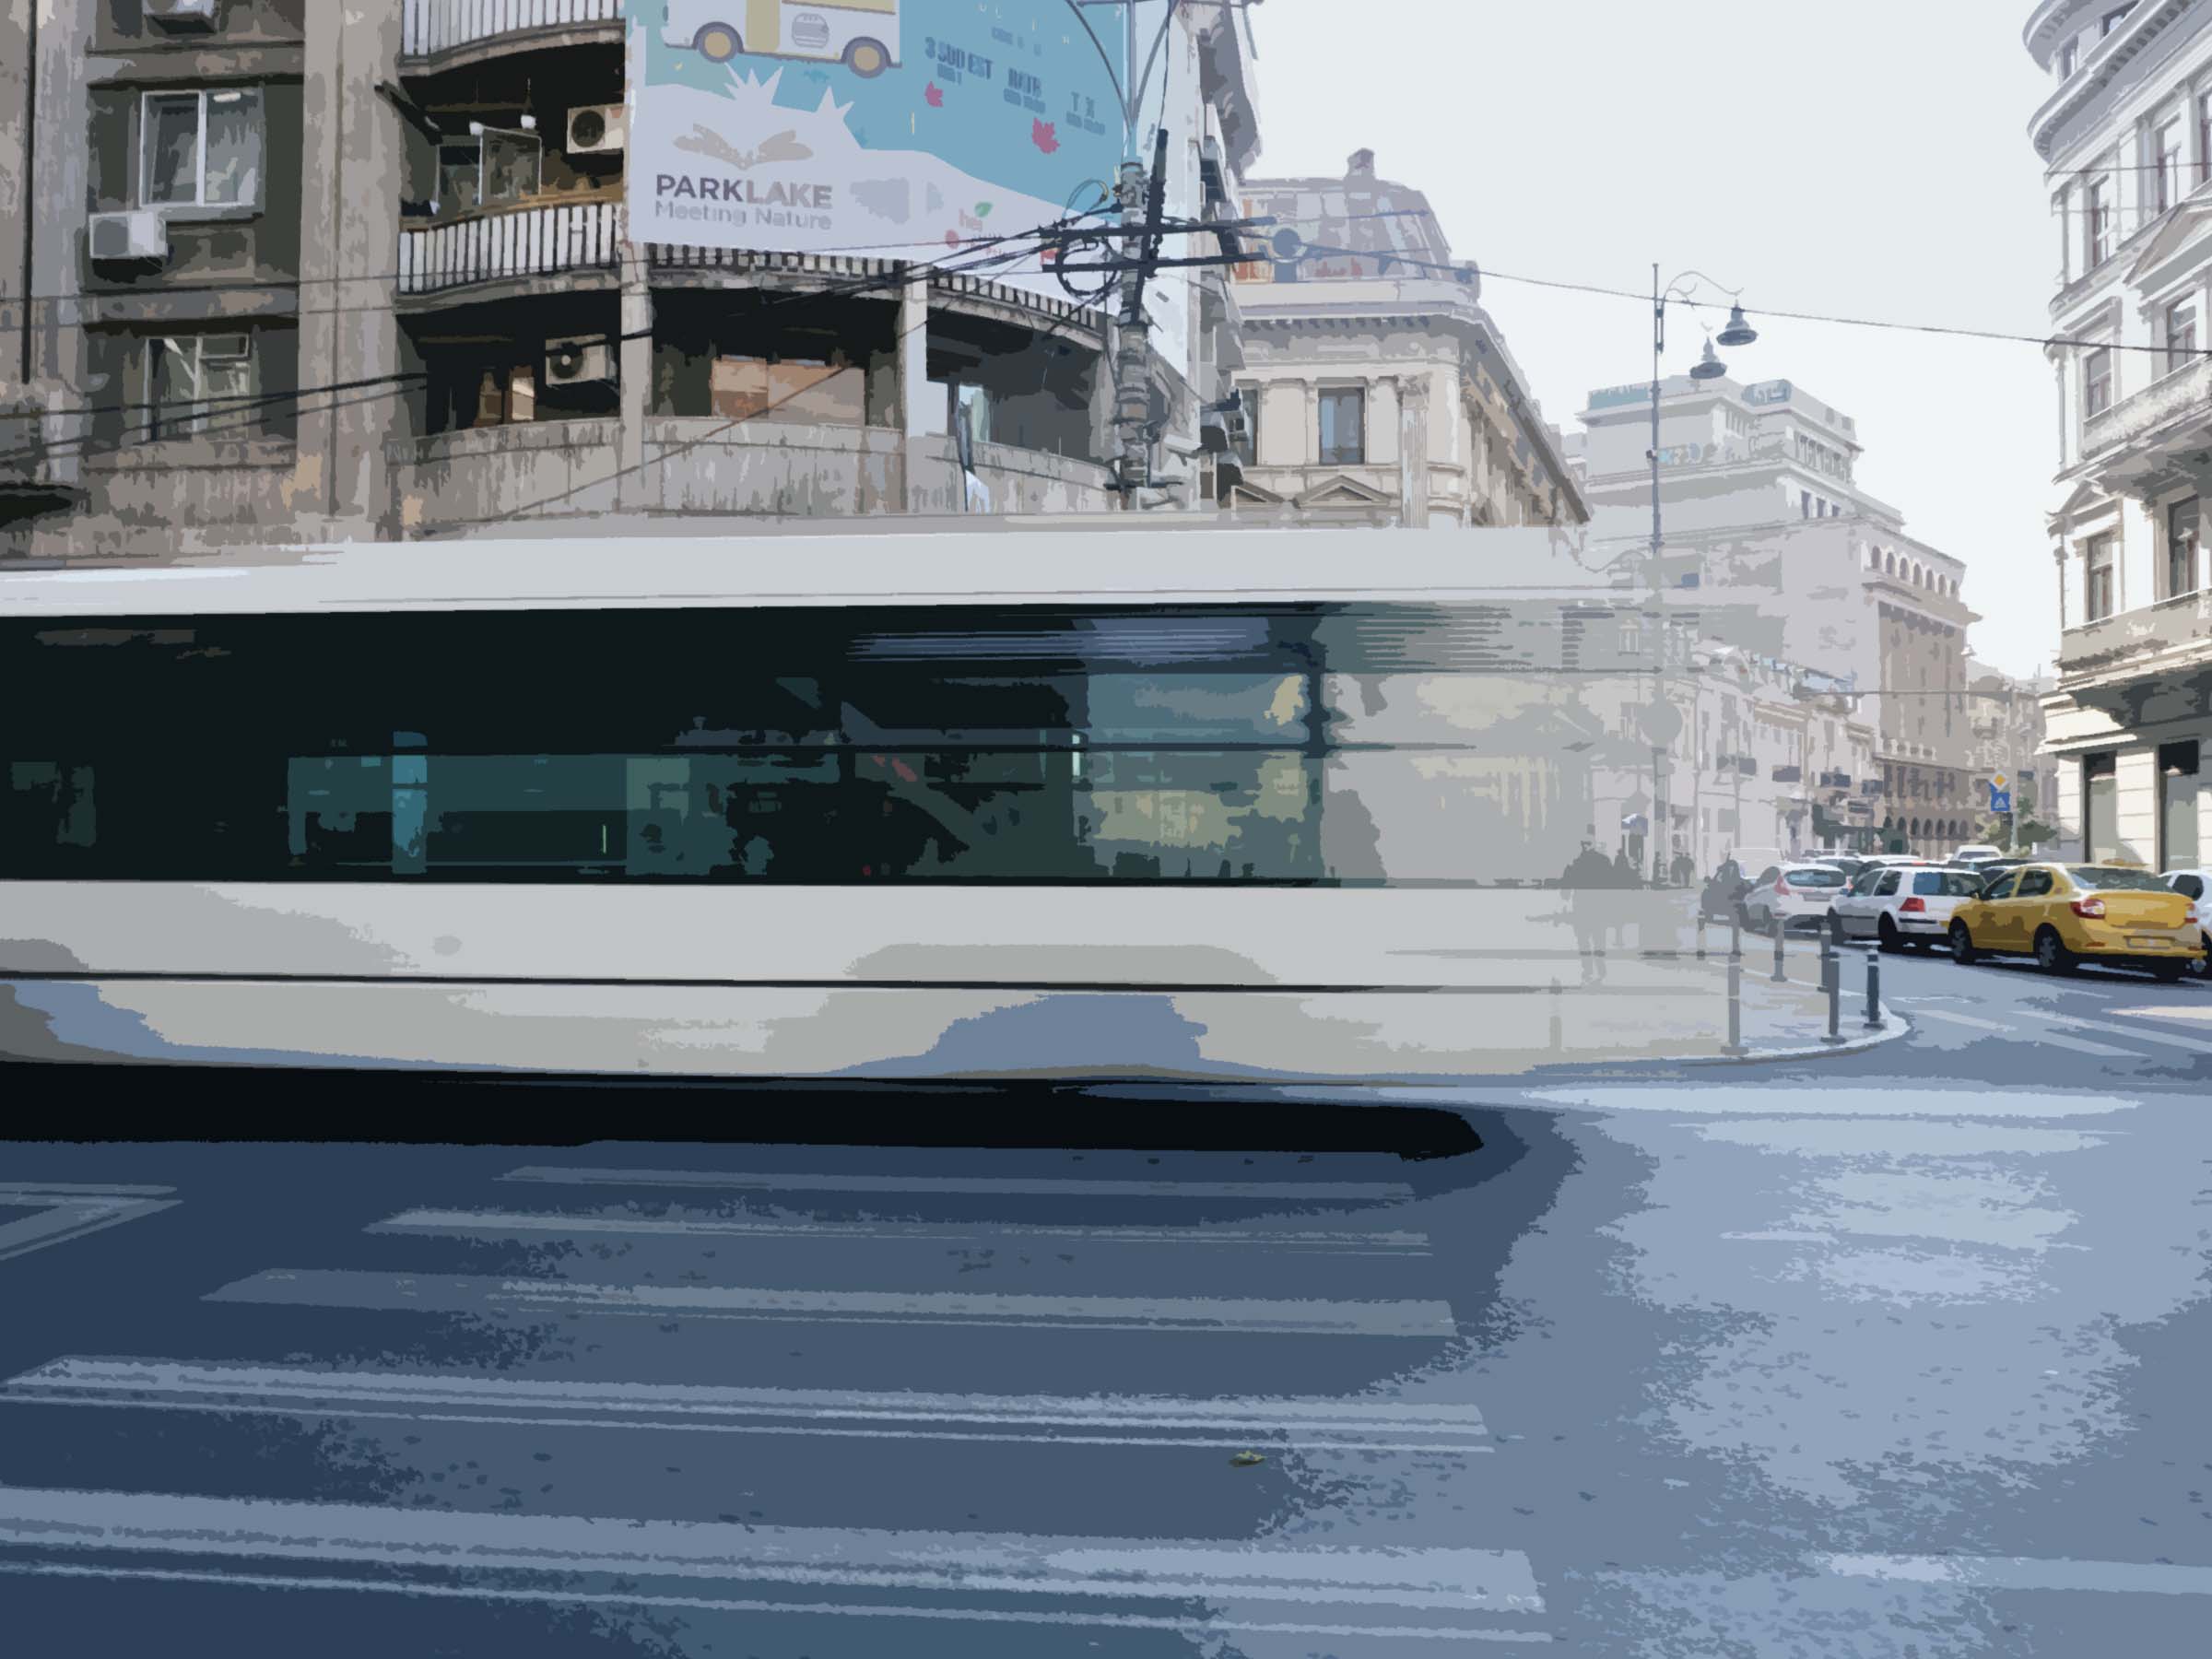 Image of Bucharest, Romania. A large white bus drives past in a whirl and large buildings are in the background. The street in the foreground are empty, and one man looks transparent and diminutive in the background